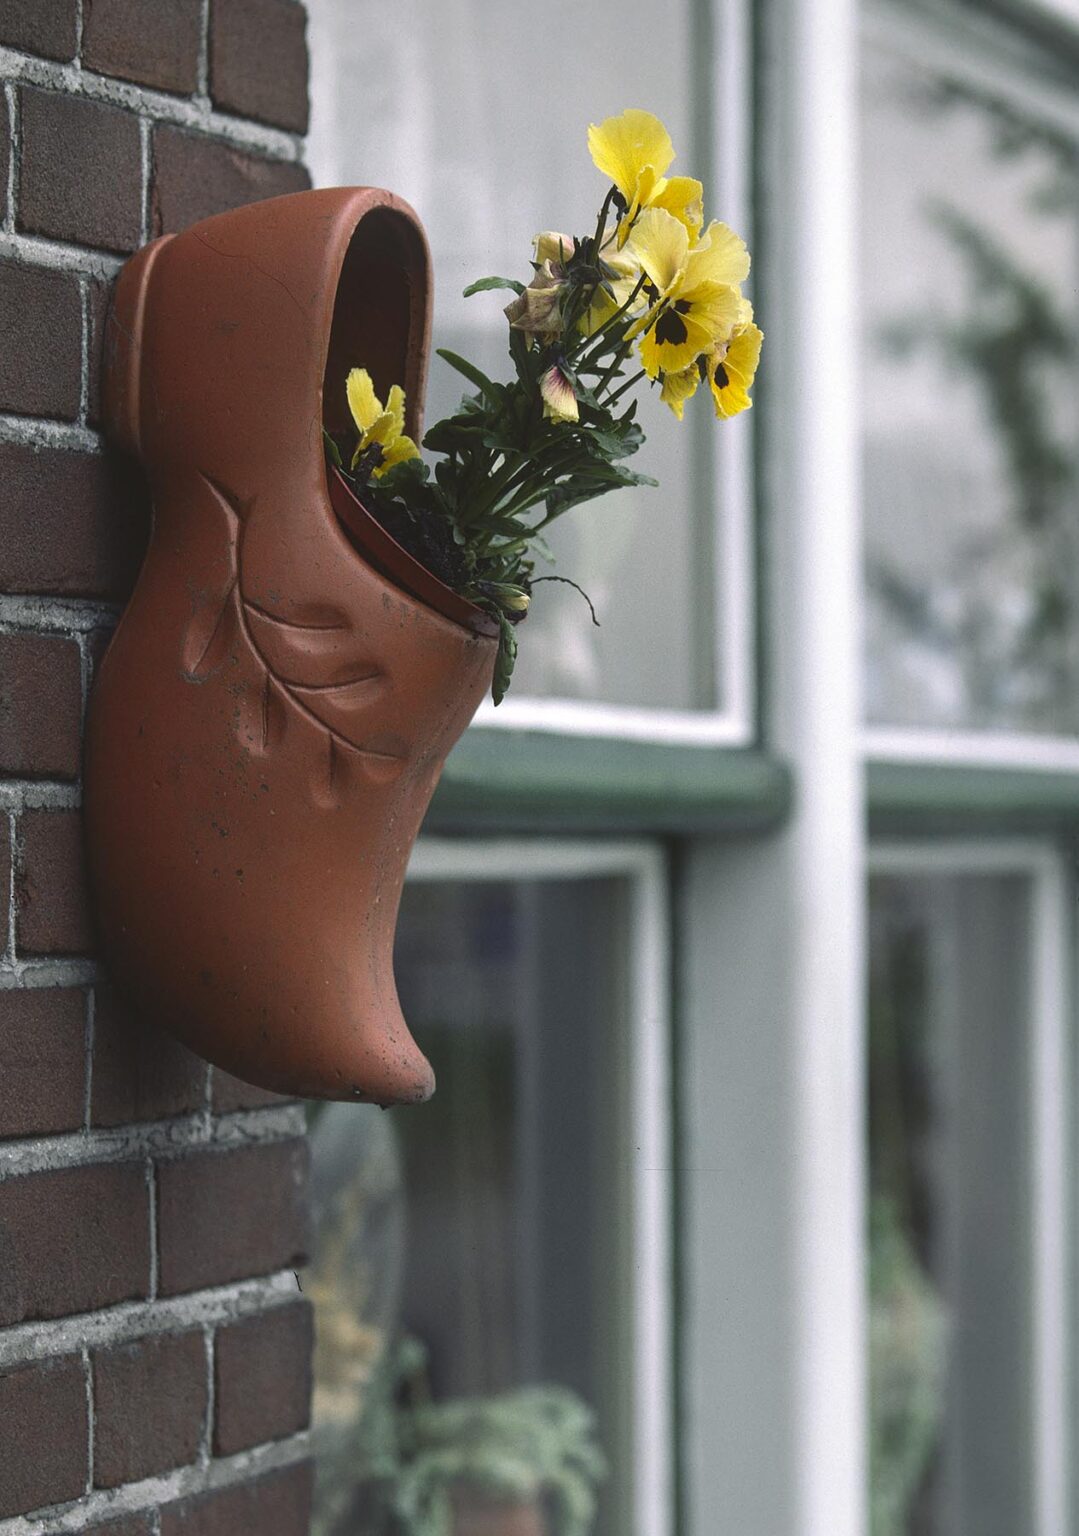 A CLAY DUTCH SHOE is used as a hanging flower pot - THE NETHERLANDS